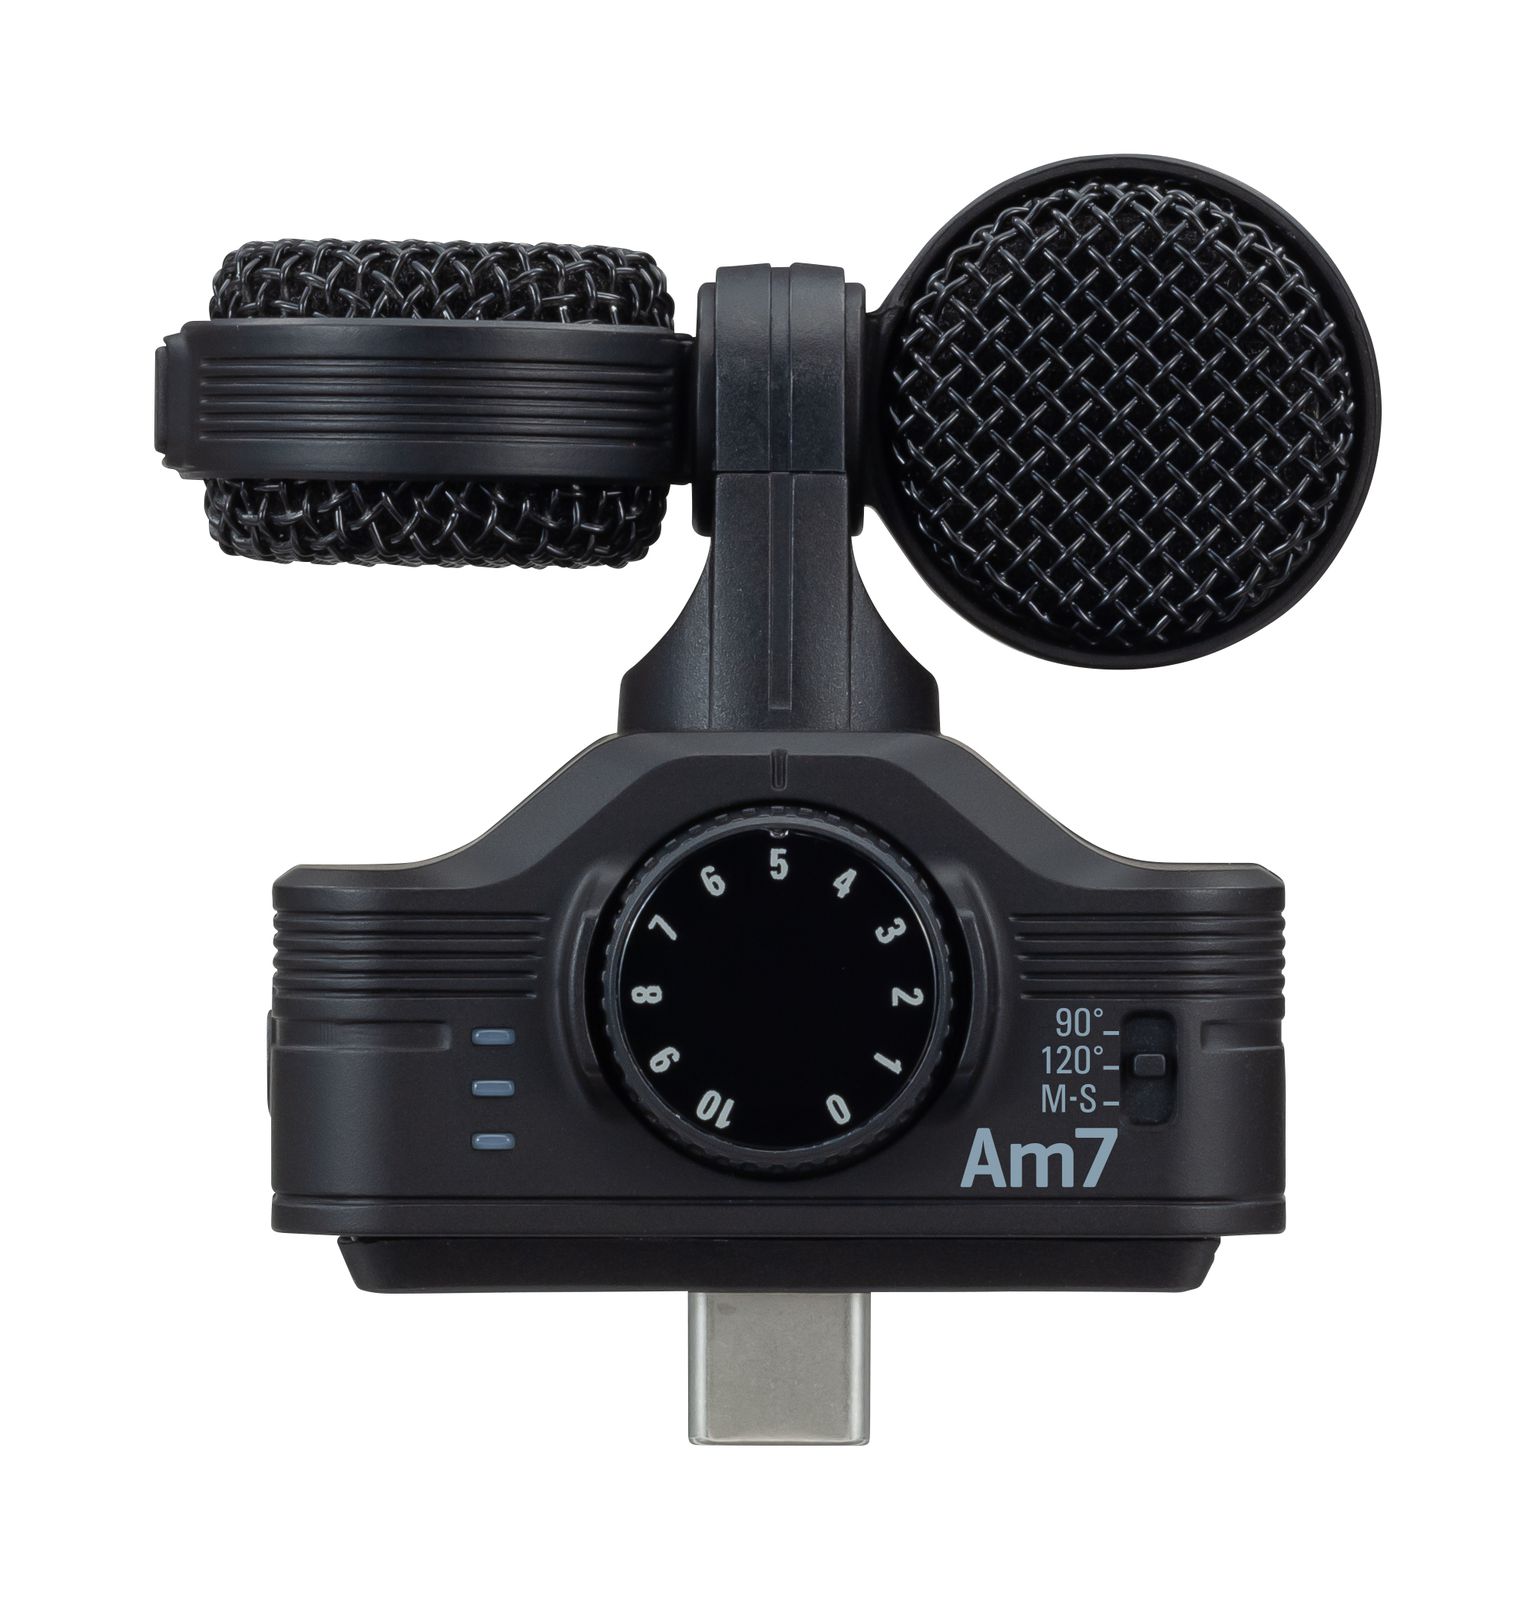 Best shotgun microphone for Android, the Zoom Am7.